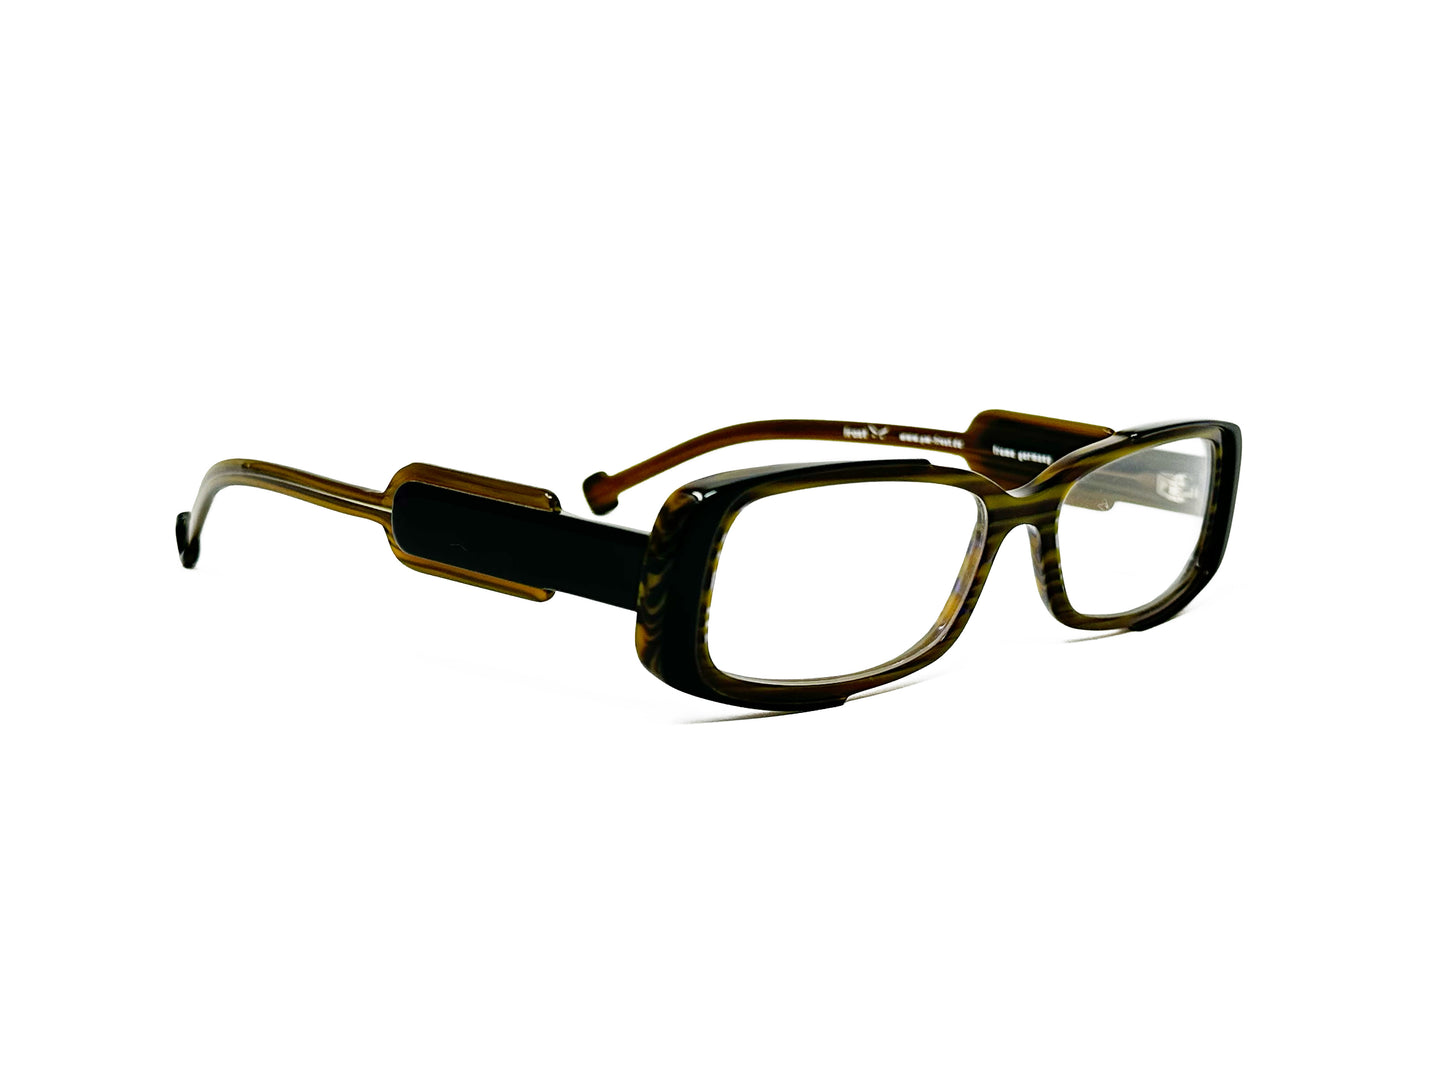 Ferre rectangular acetate optical frame with chunky temples. Model: On Air. Color: C25 - Brown. Side view.